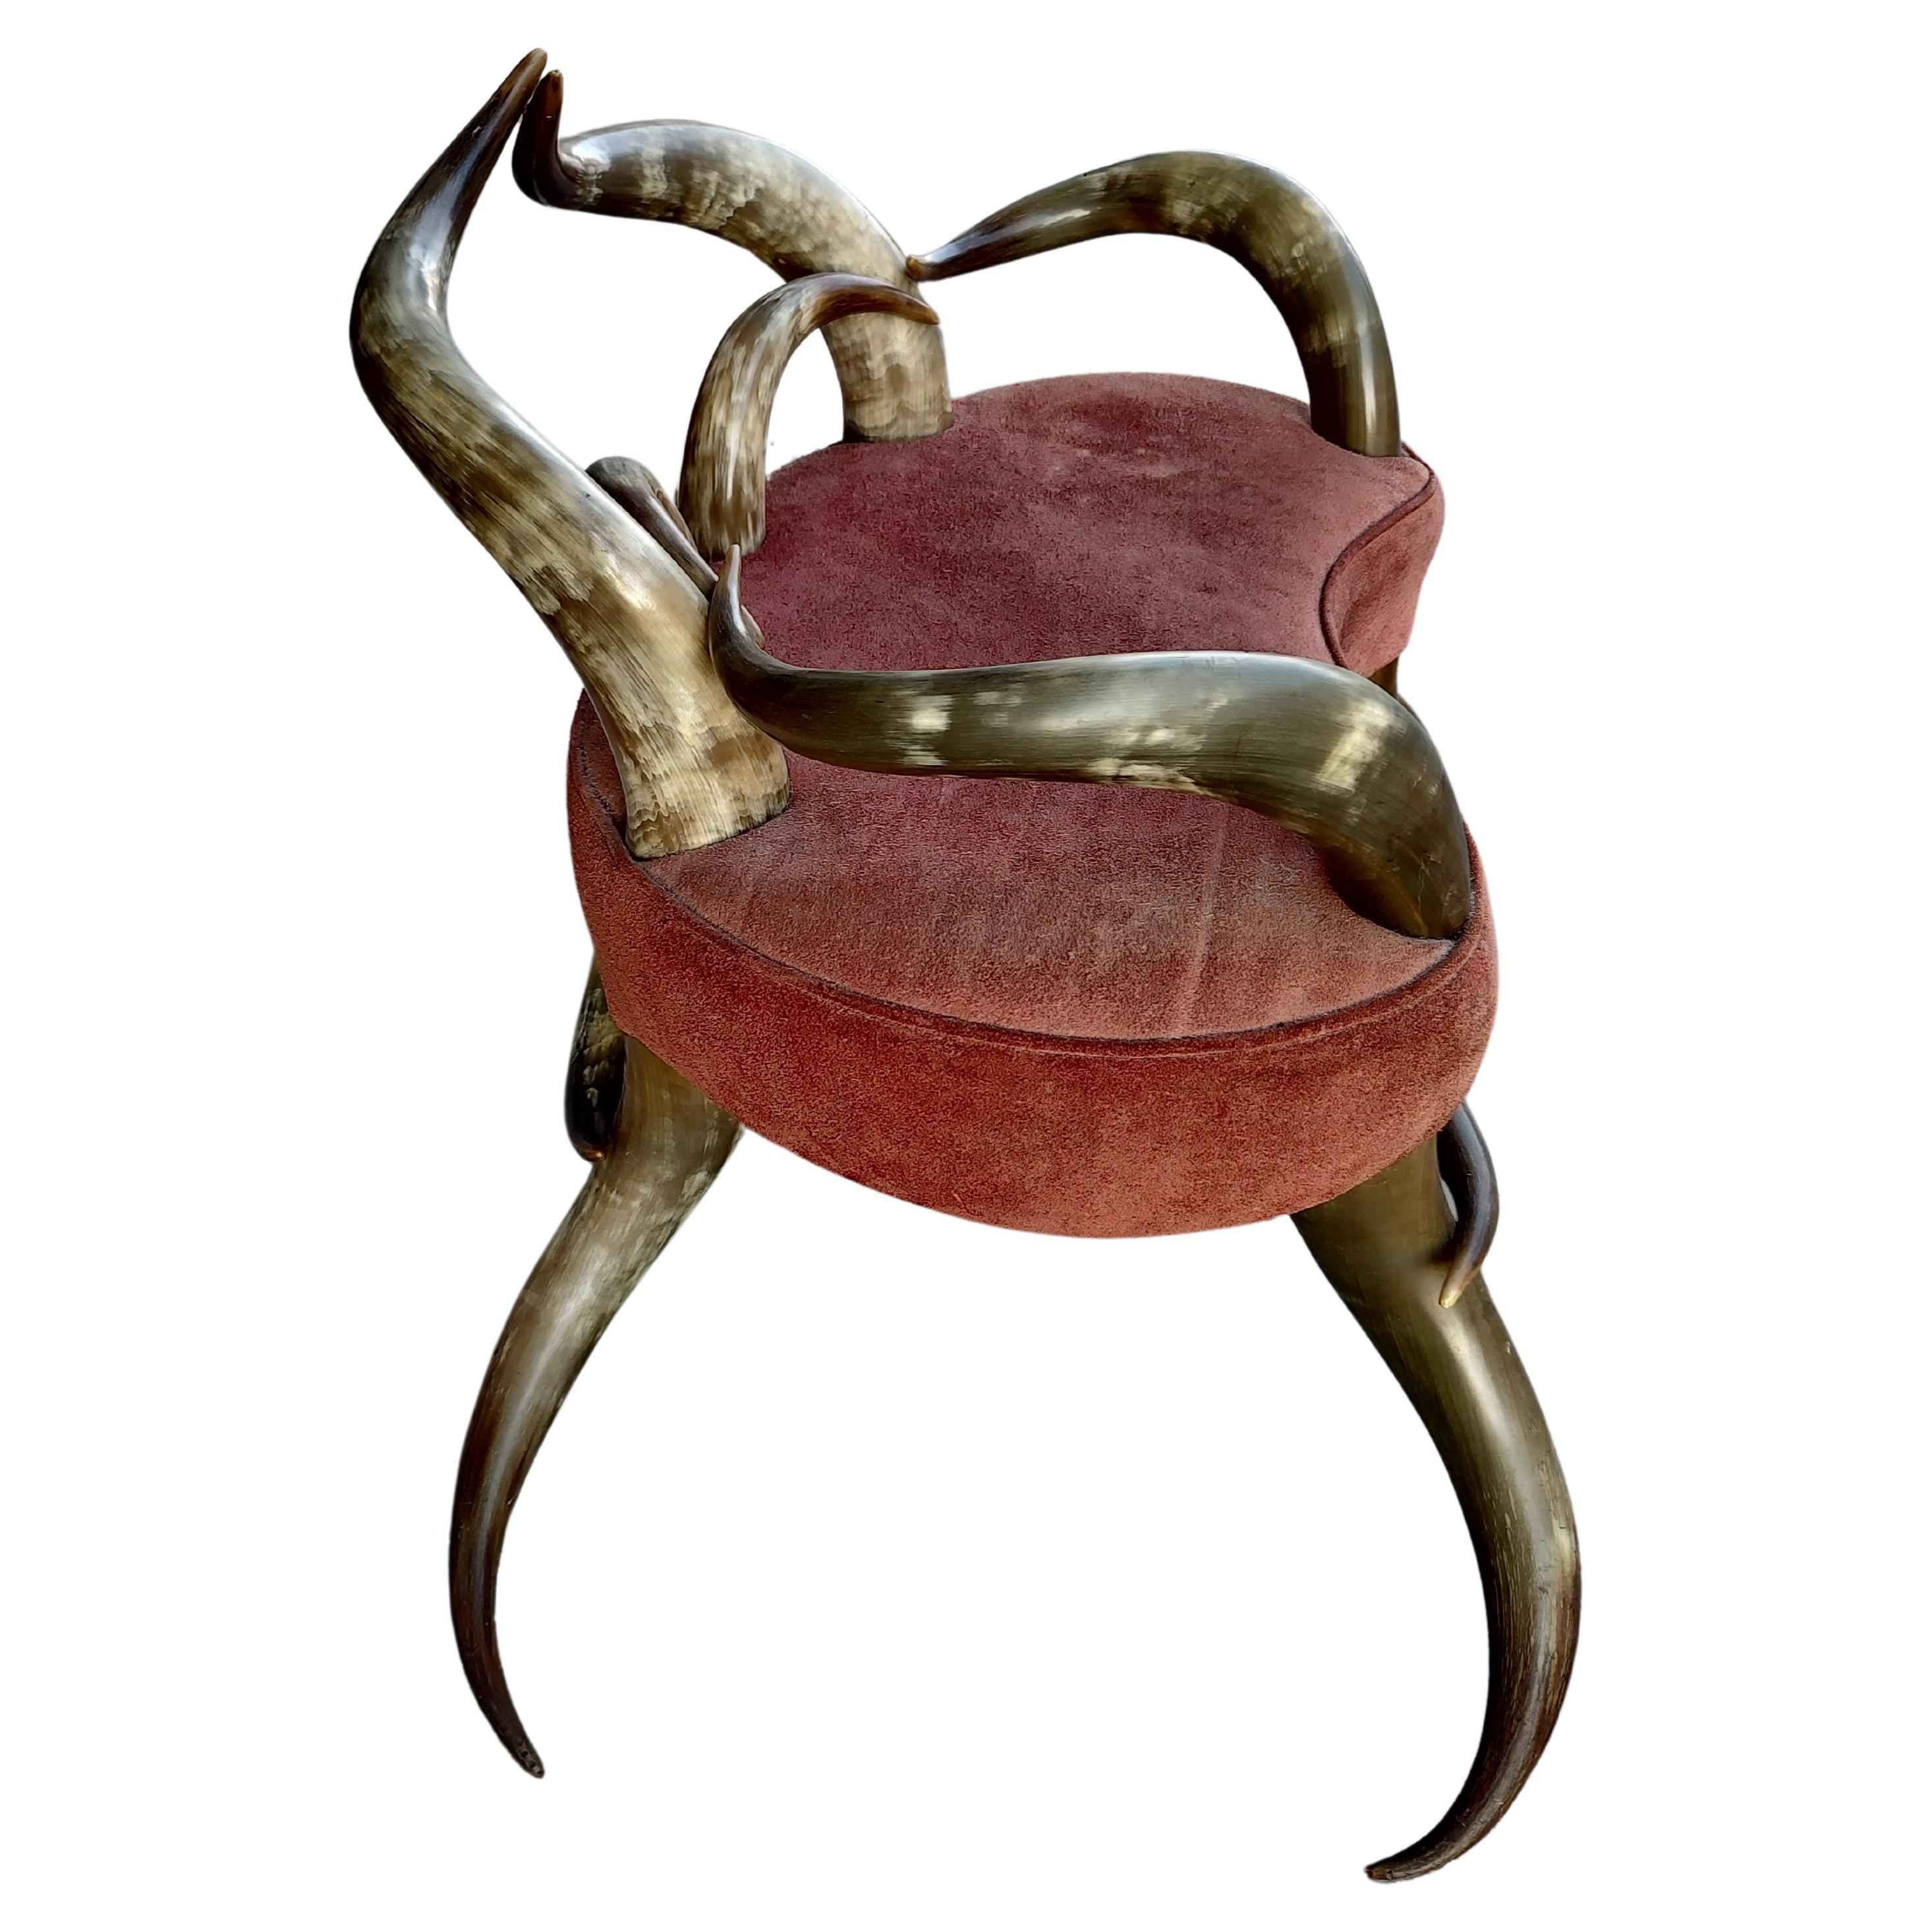 Rare and fabulous steer horn vanity bench with a suede fabric. In excellent vintage condition with minimal wear. Horns are tight and sturdy with no damage. Truly a rare form.